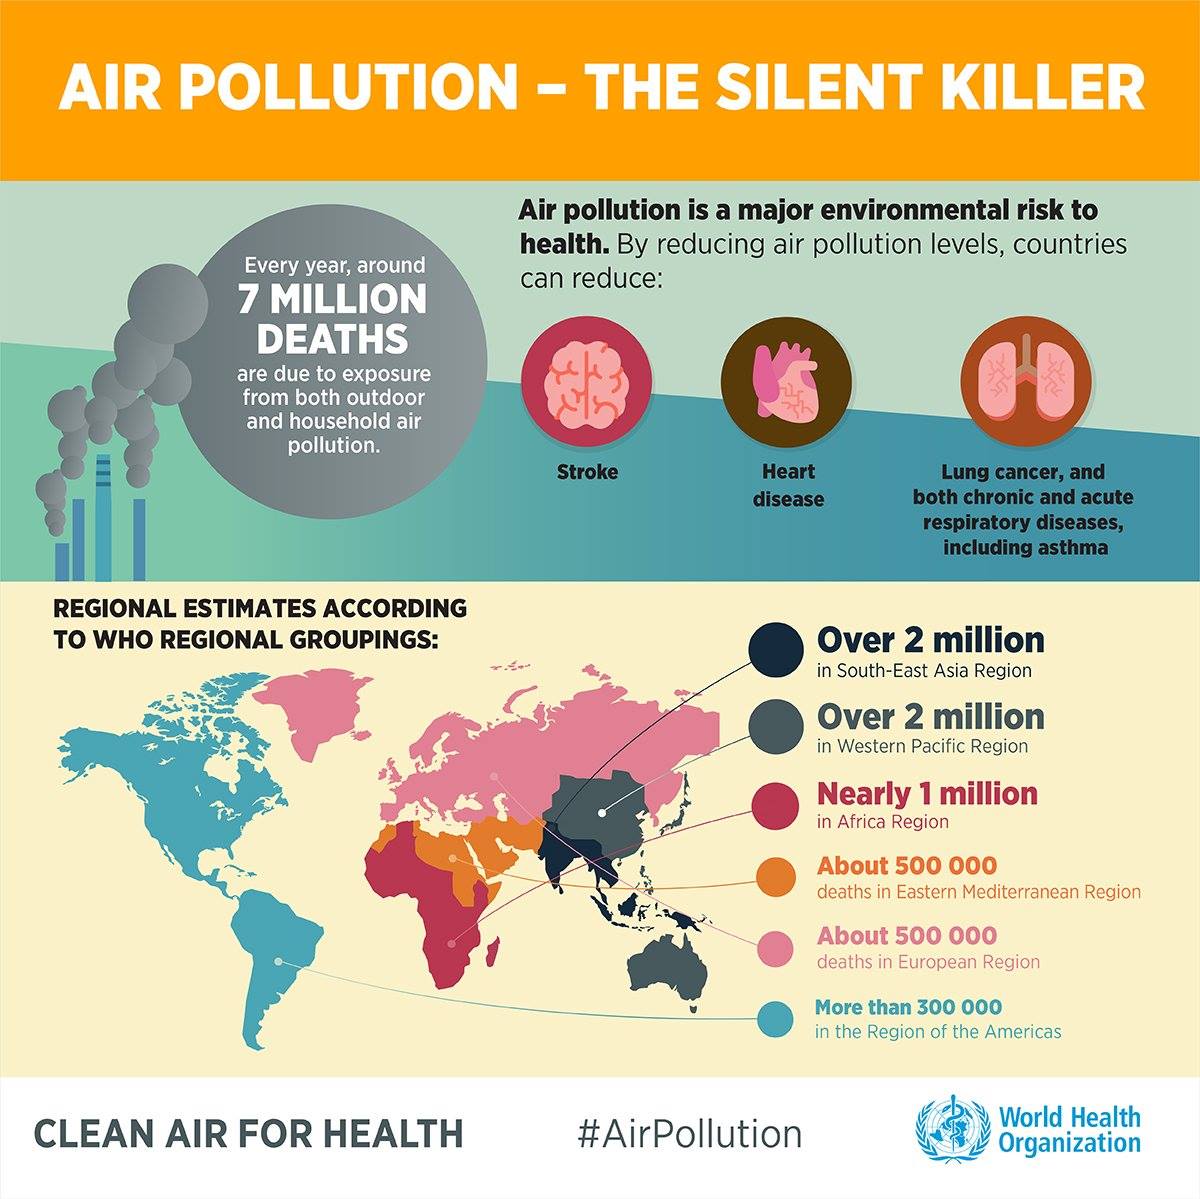 Air Pollution infographic showing stats about deaths worldwide